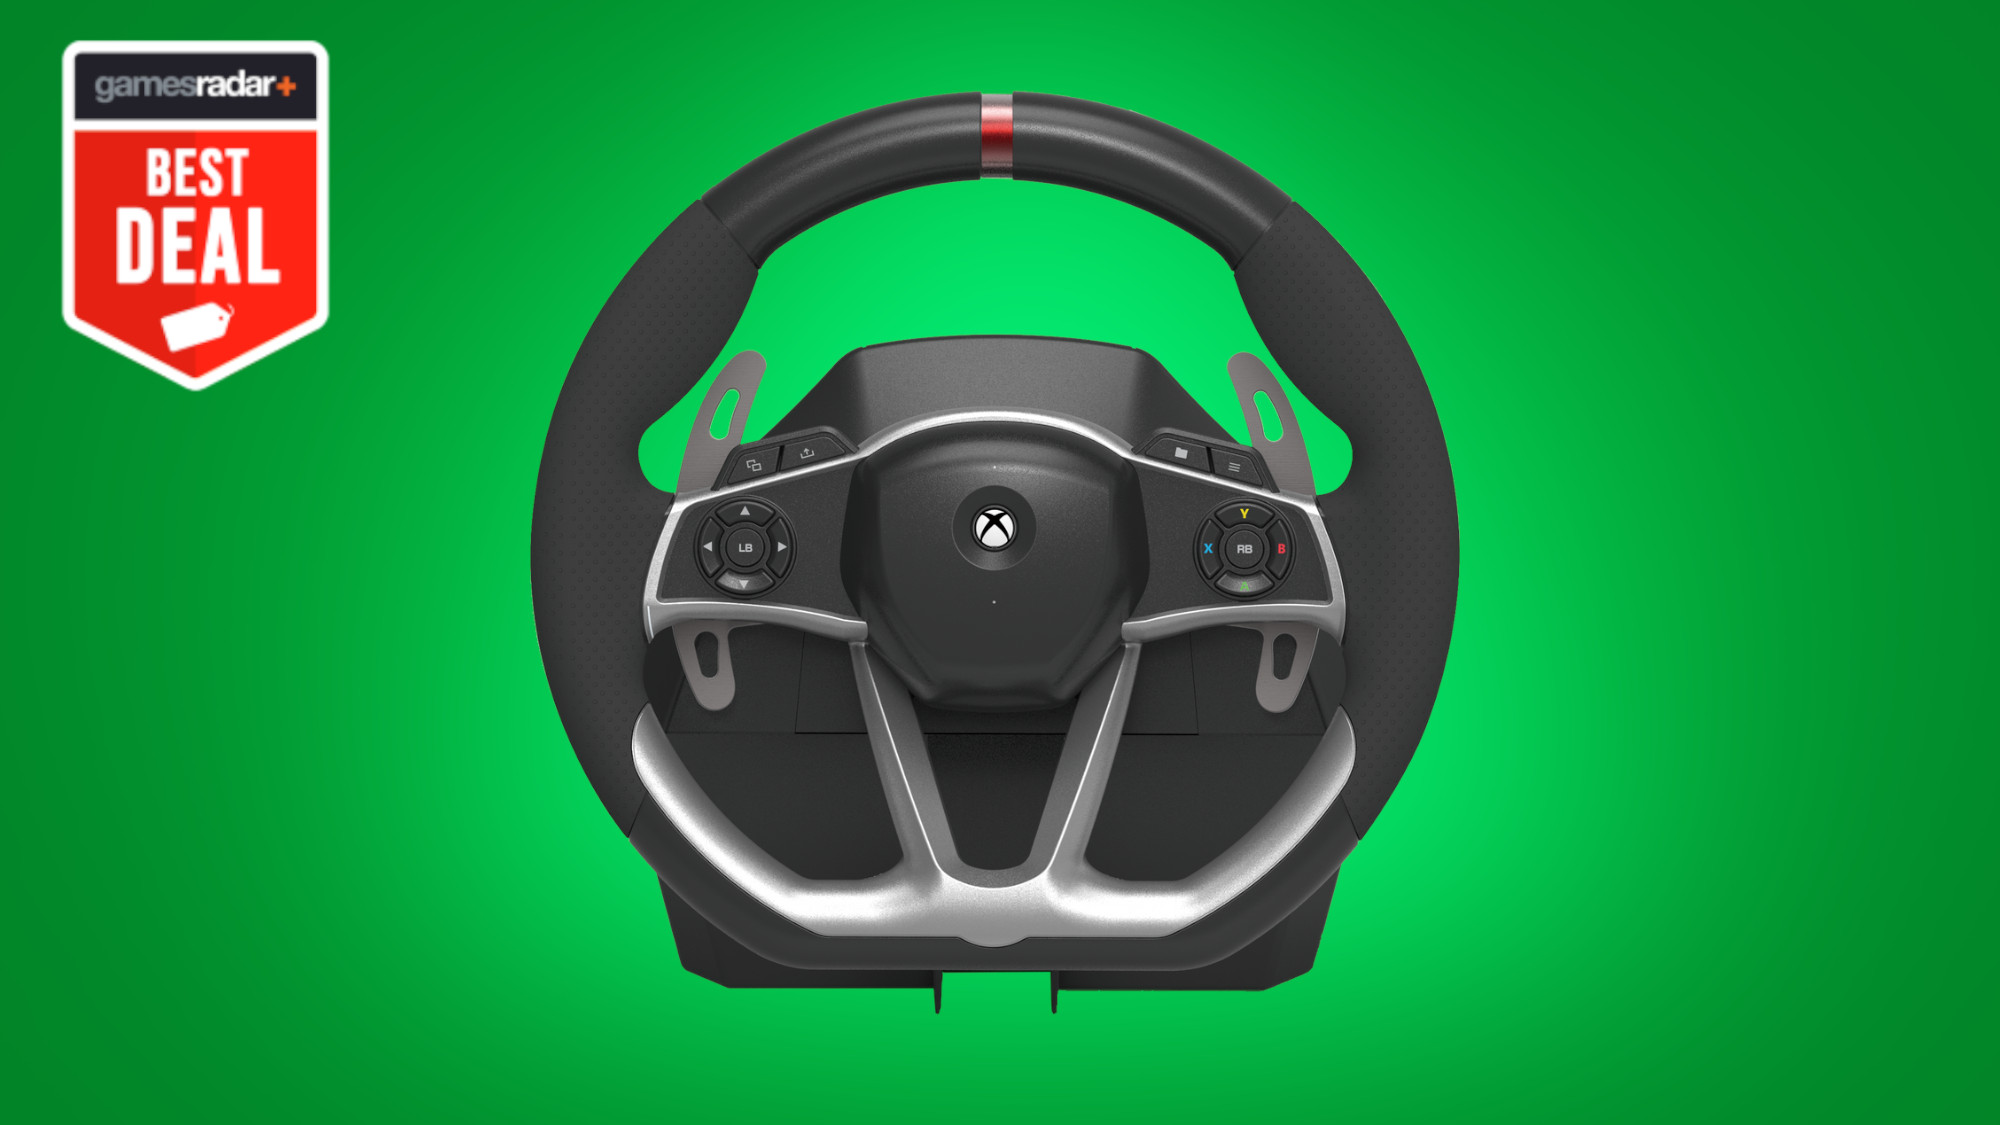 Grab this force feedback Xbox steering wheel for a record low